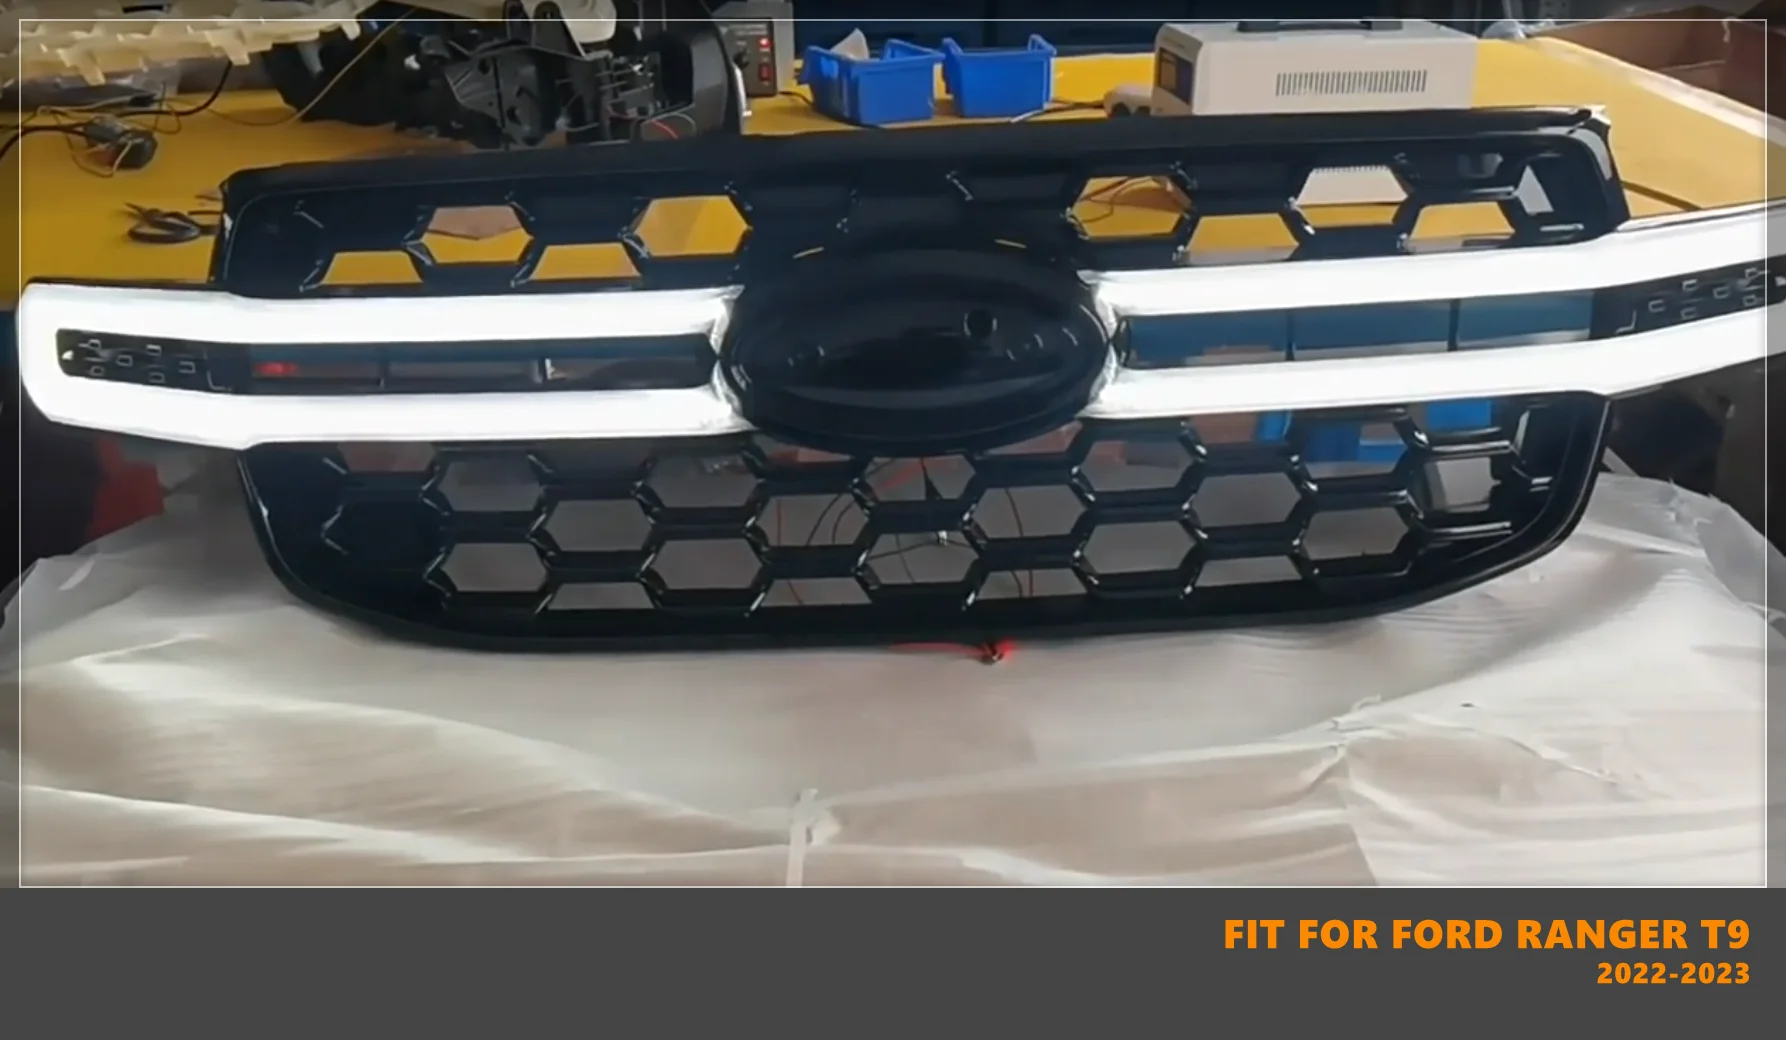 2022/23 FORD RANGER T9 FRONT GRILL LED